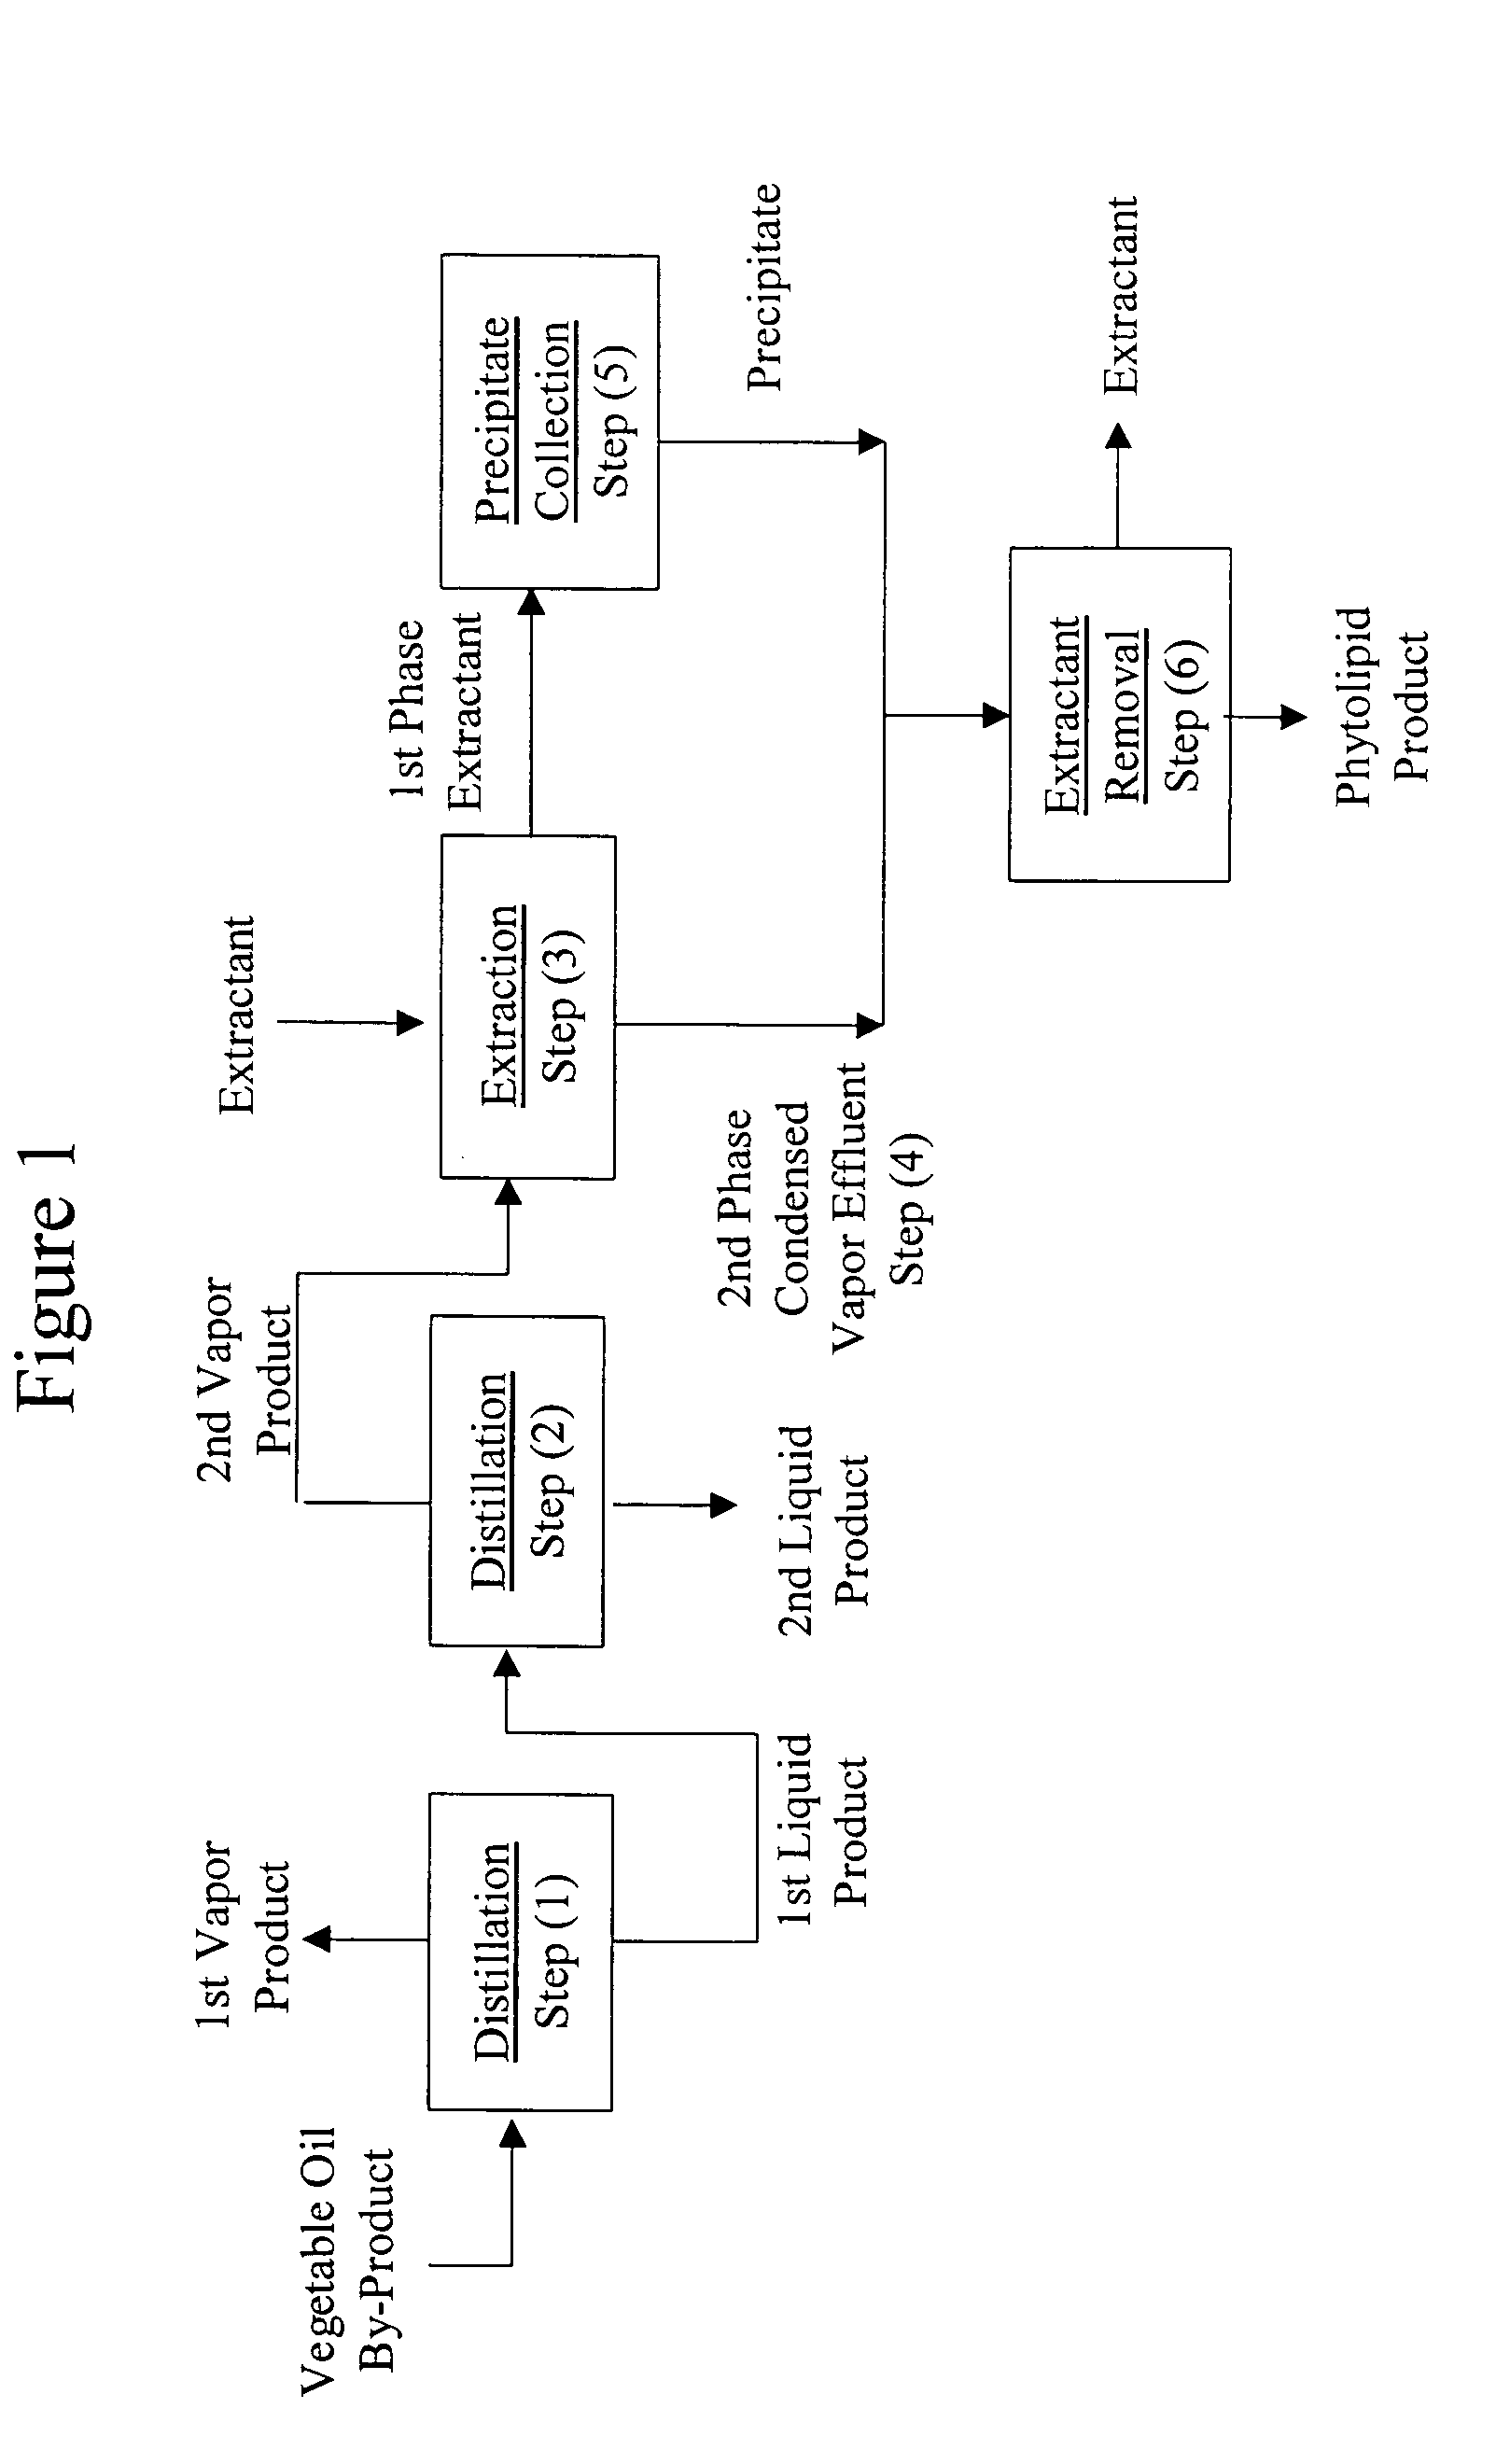 Process for the recovery of a phytolipid composition